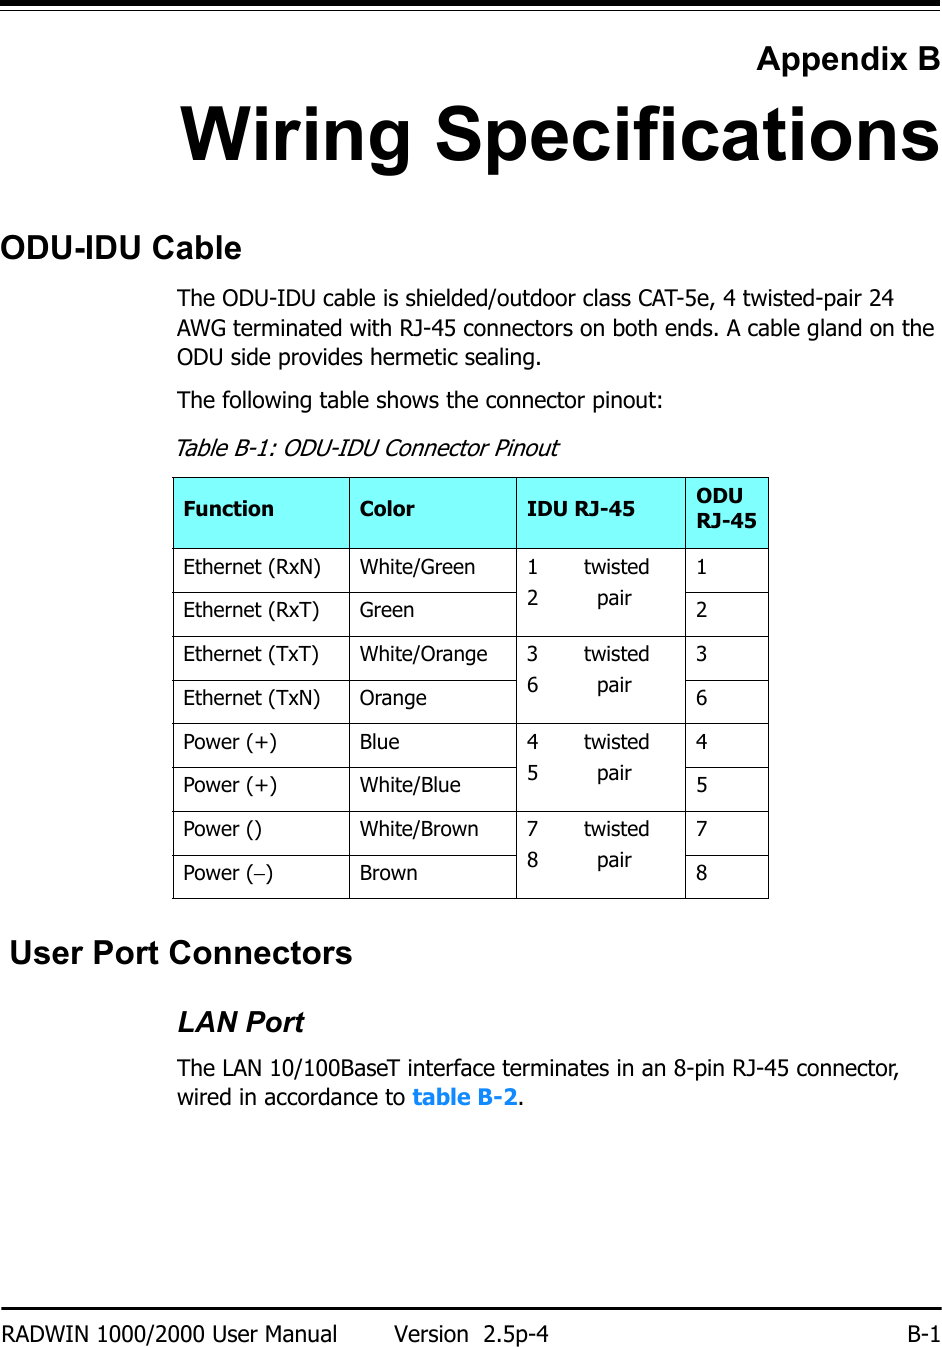 RADWIN 1000/2000 User Manual Version  2.5p-4 B-1Appendix BWiring SpecificationsODU-IDU CableThe ODU-IDU cable is shielded/outdoor class CAT-5e, 4 twisted-pair 24 AWG terminated with RJ-45 connectors on both ends. A cable gland on the ODU side provides hermetic sealing.The following table shows the connector pinout: User Port ConnectorsLAN PortThe LAN 10/100BaseT interface terminates in an 8-pin RJ-45 connector, wired in accordance to table B-2.Table B-1: ODU-IDU Connector PinoutFunction Color IDU RJ-45 ODU RJ-45Ethernet (RxN) White/Green 1       twisted2         pair1 Ethernet (RxT) Green 2 Ethernet (TxT) White/Orange 3       twisted6         pair3 Ethernet (TxN) Orange 6 Power (+) Blue 4       twisted5         pair4 Power (+) White/Blue 5 Power () White/Brown 7       twisted8         pair7 Power (−)Brown 8 